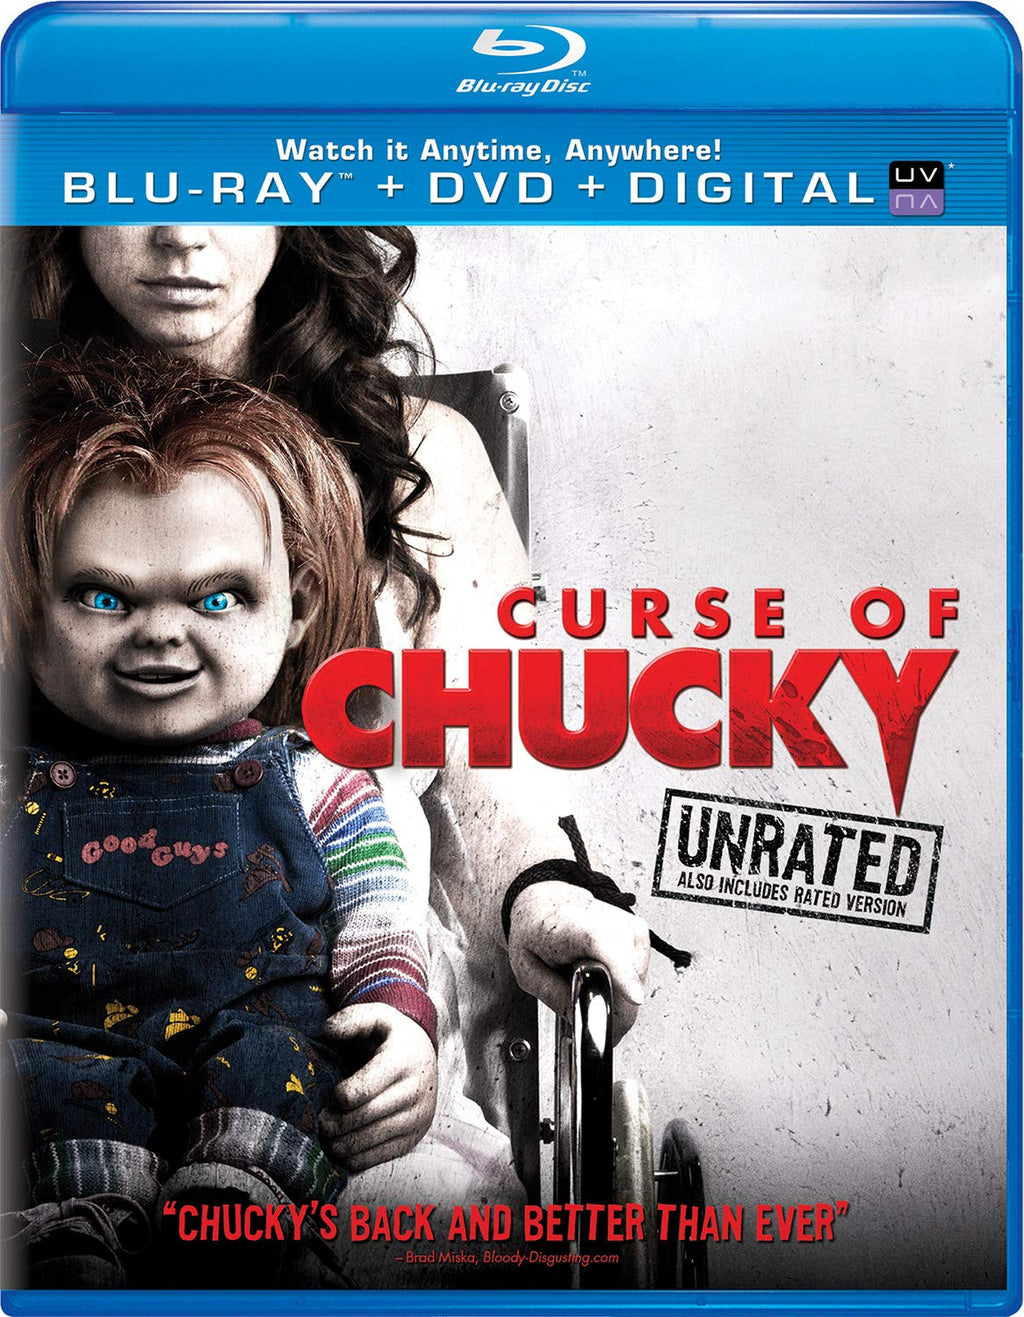 Curse of Chucky (Unrated) Blu-ray + DVD + Digital